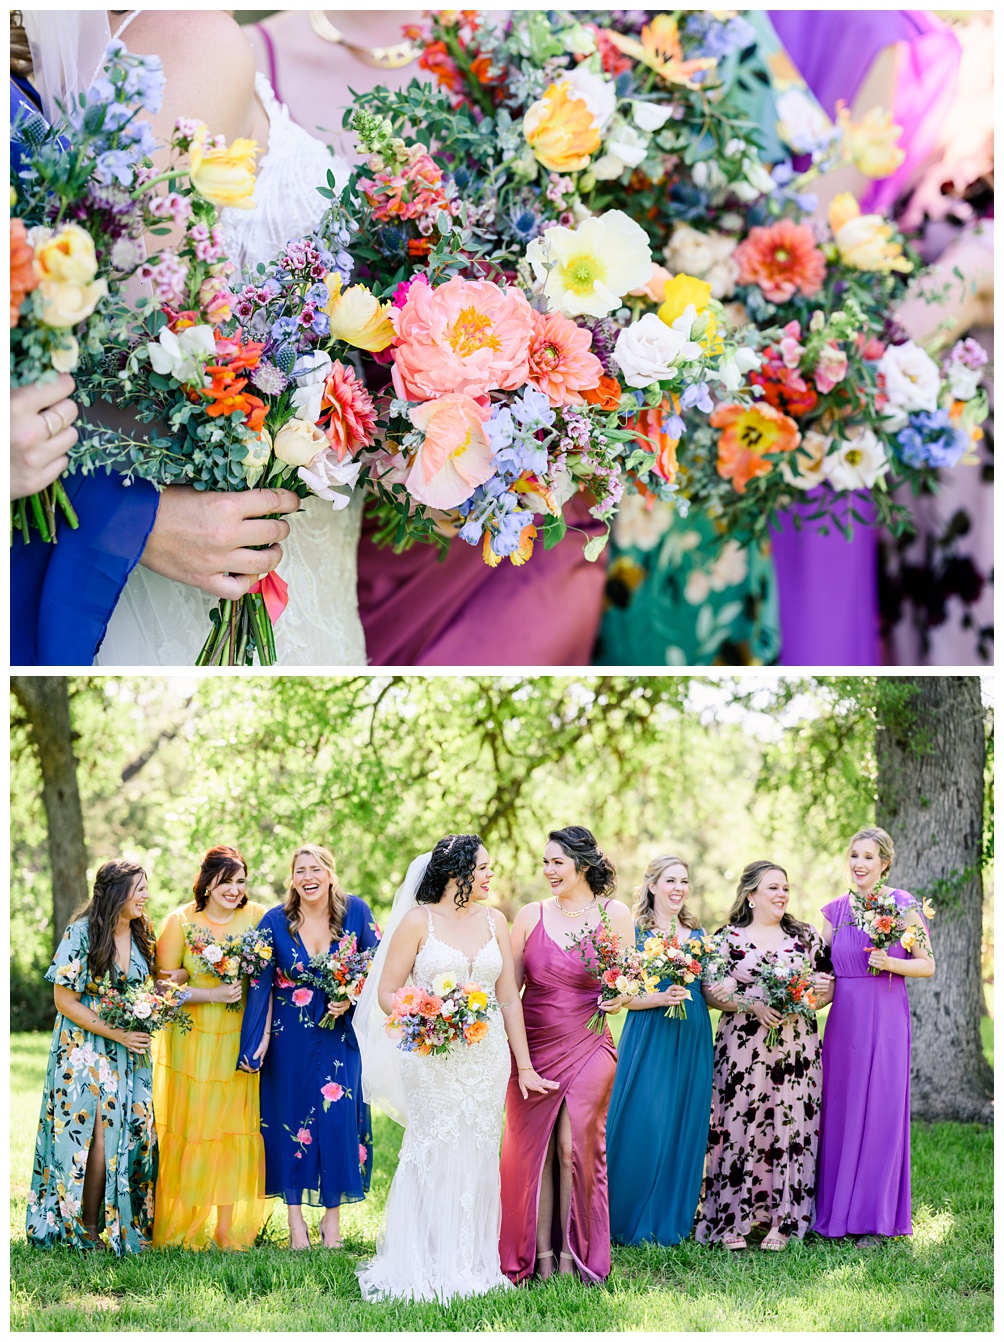 Lively, Springtime colorful bloom boho chic wedding at Pecan Springs Ranch in Austin Texas with bouquets by Sixpence Floral and planned by Truly Together Event Co